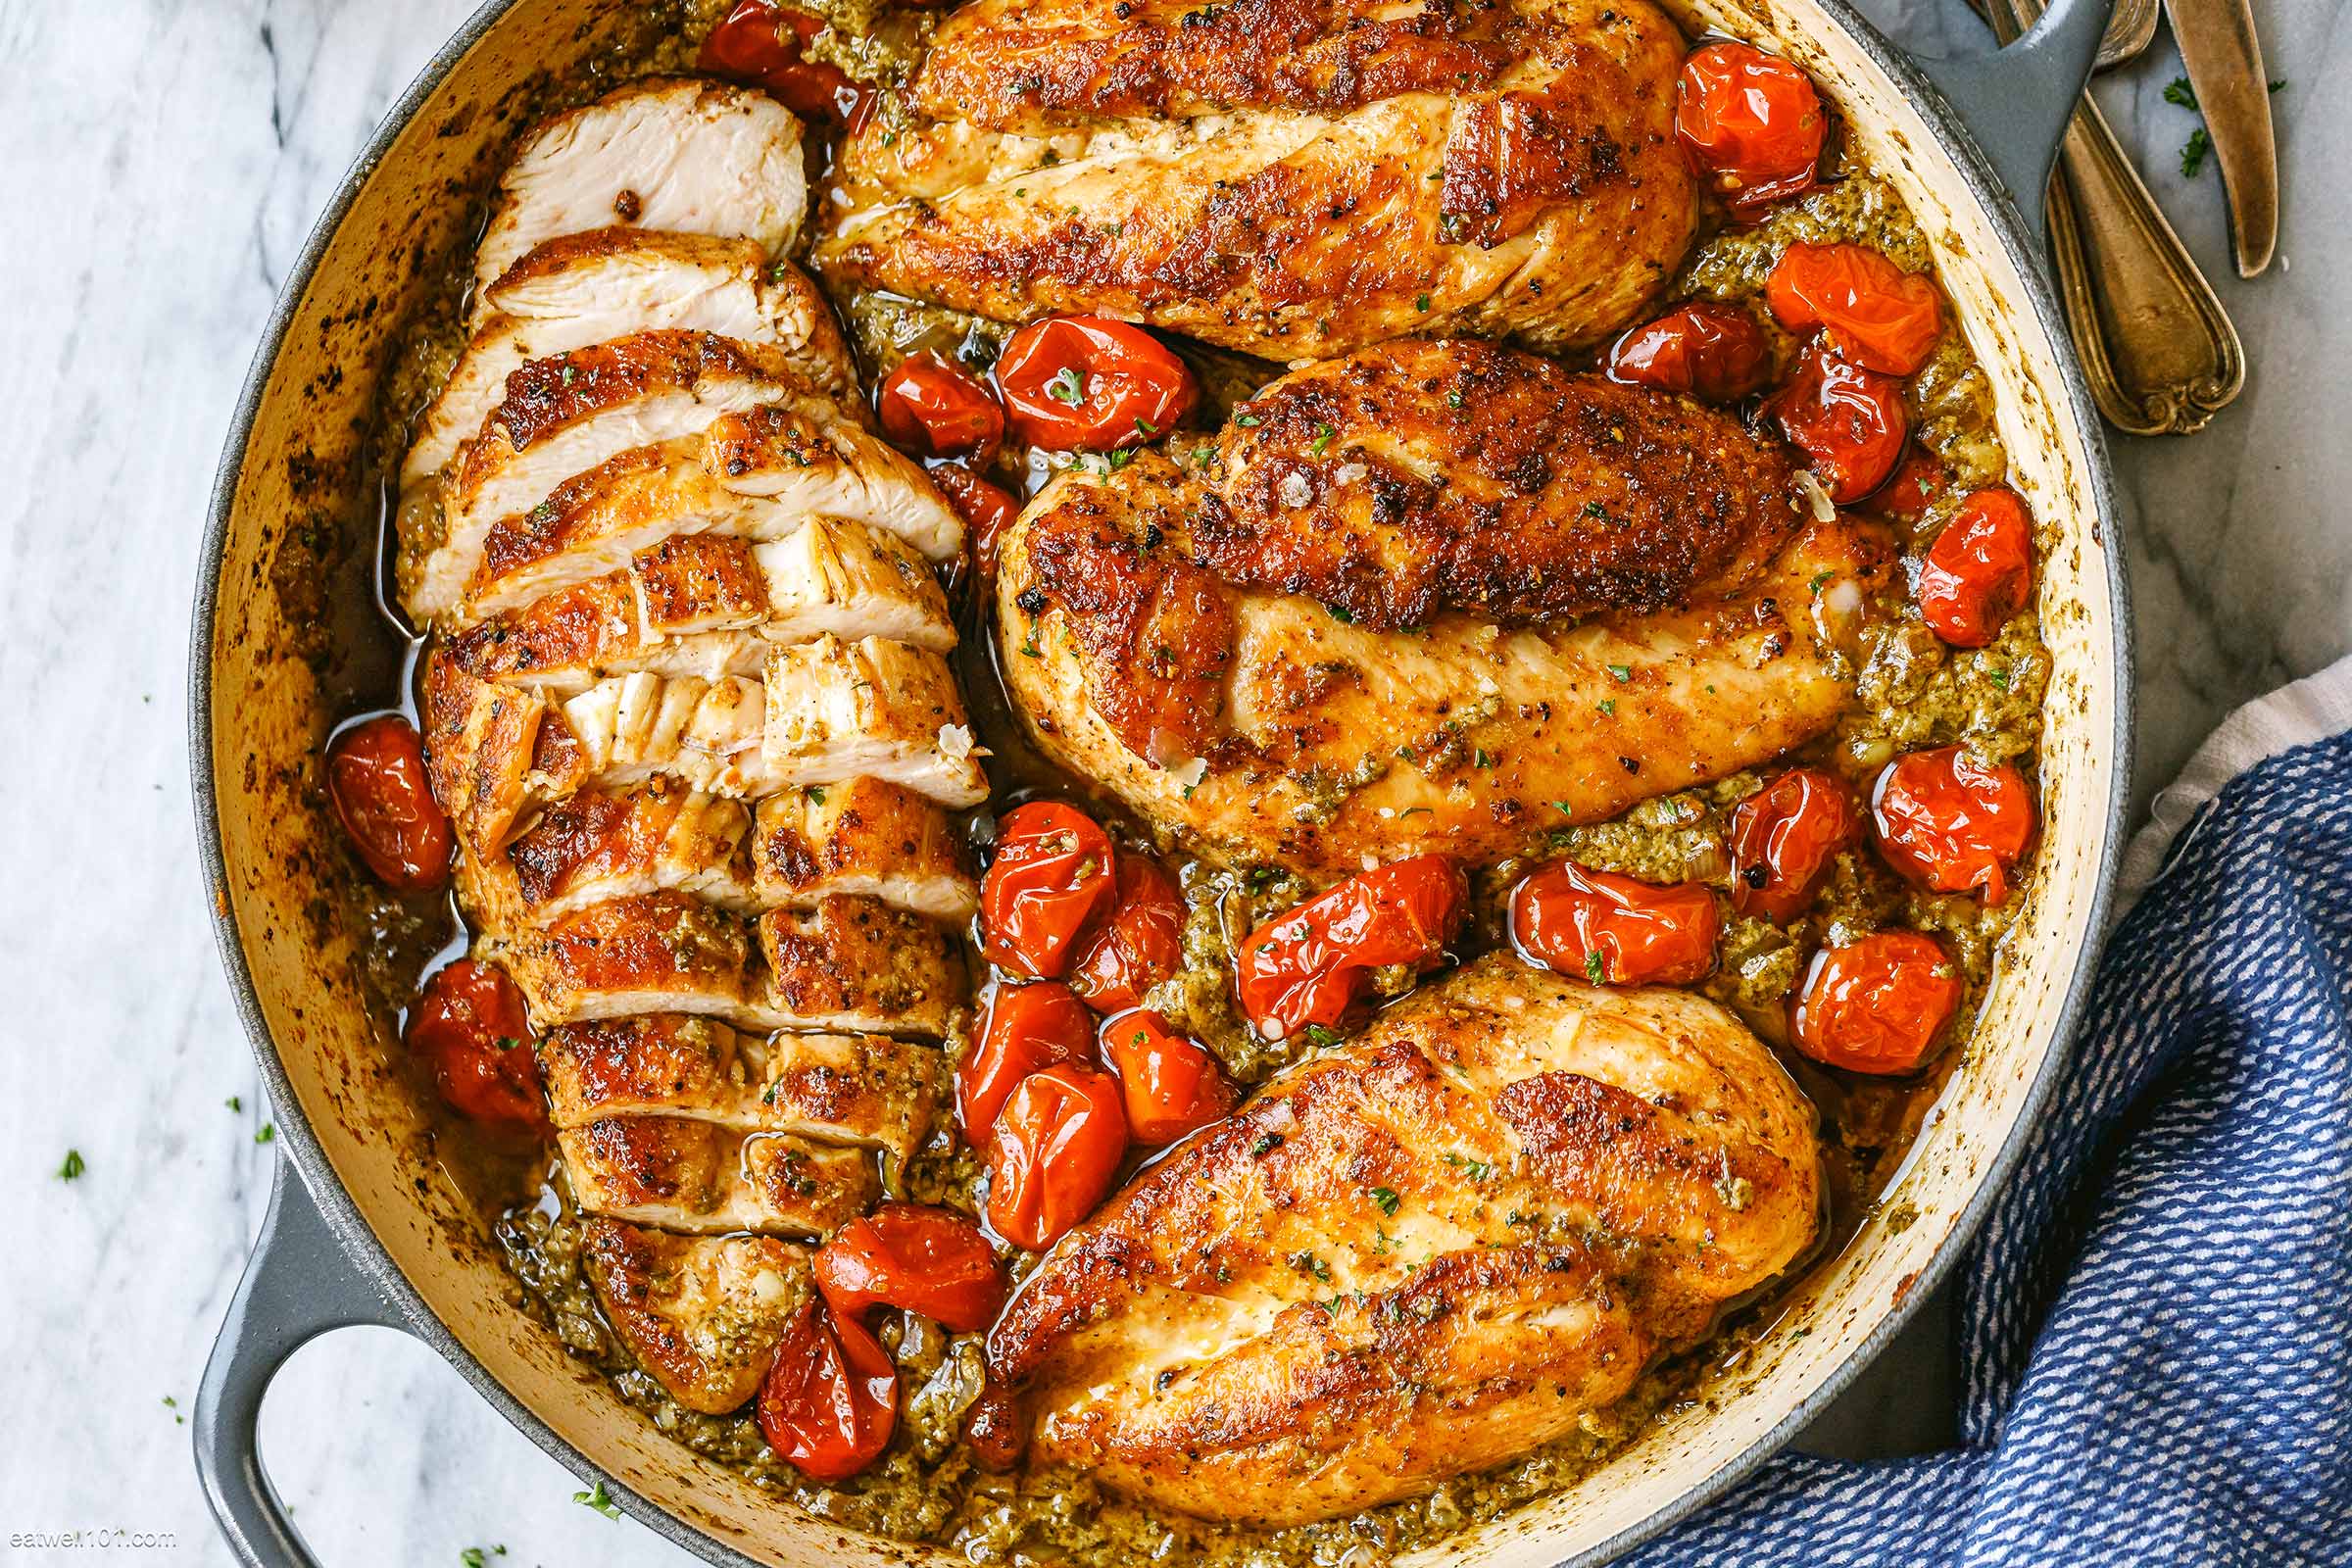 24 Keto Chicken Breast Recipes to Keep You on Track!